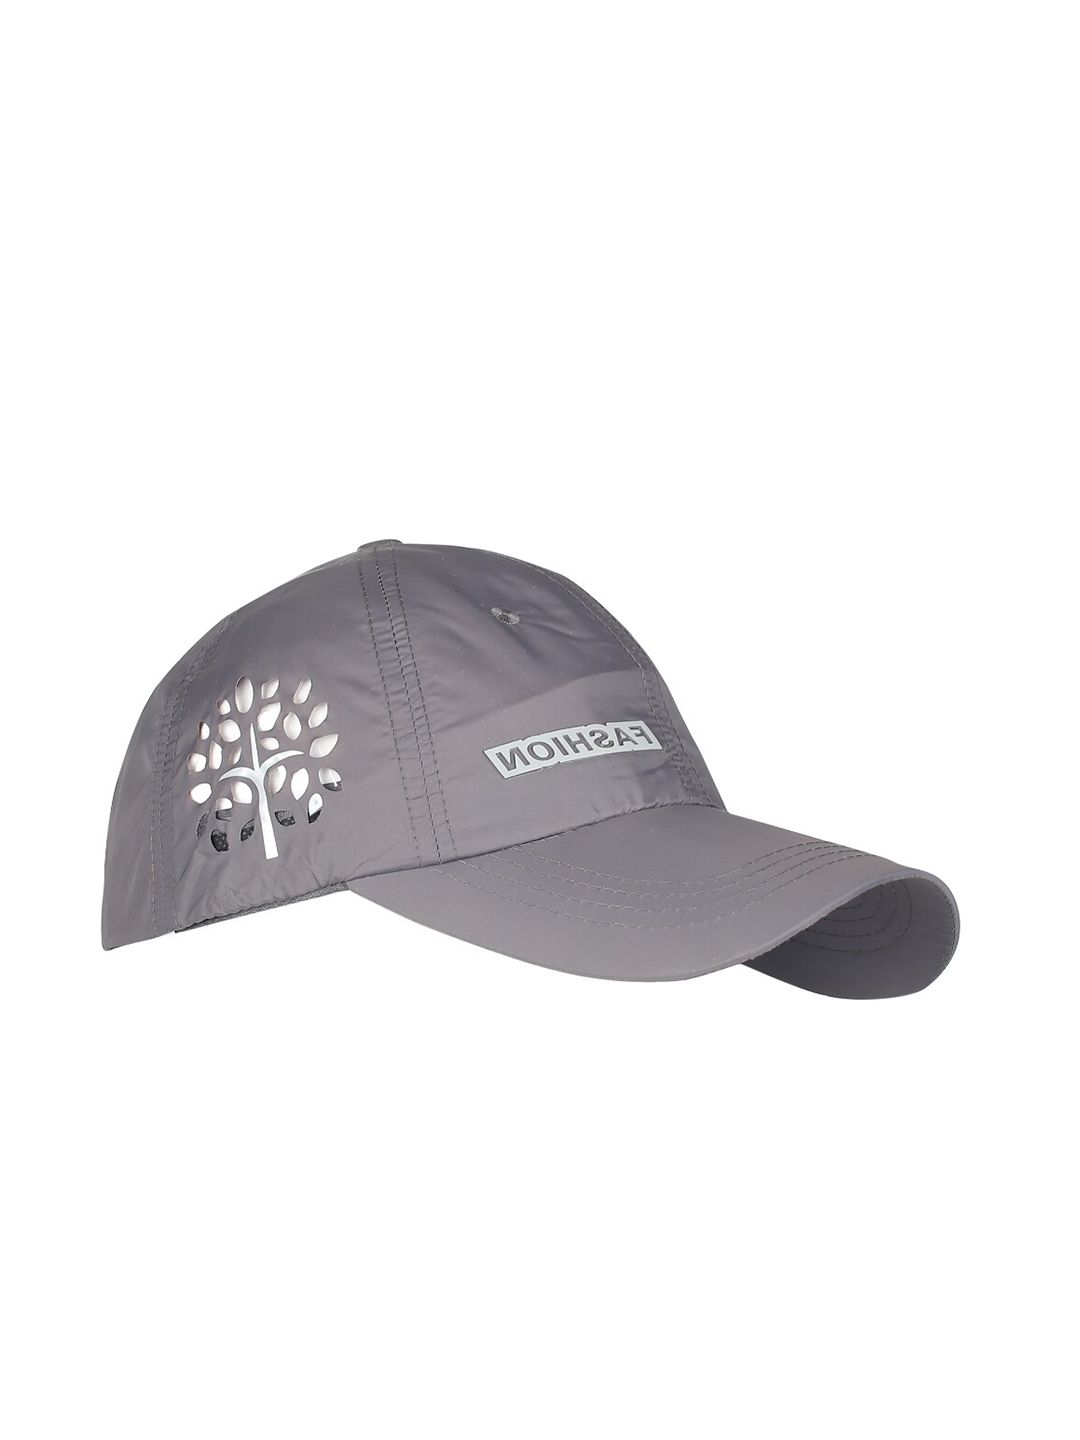 iSWEVEN Grey Printed Snapback Cap Price in India